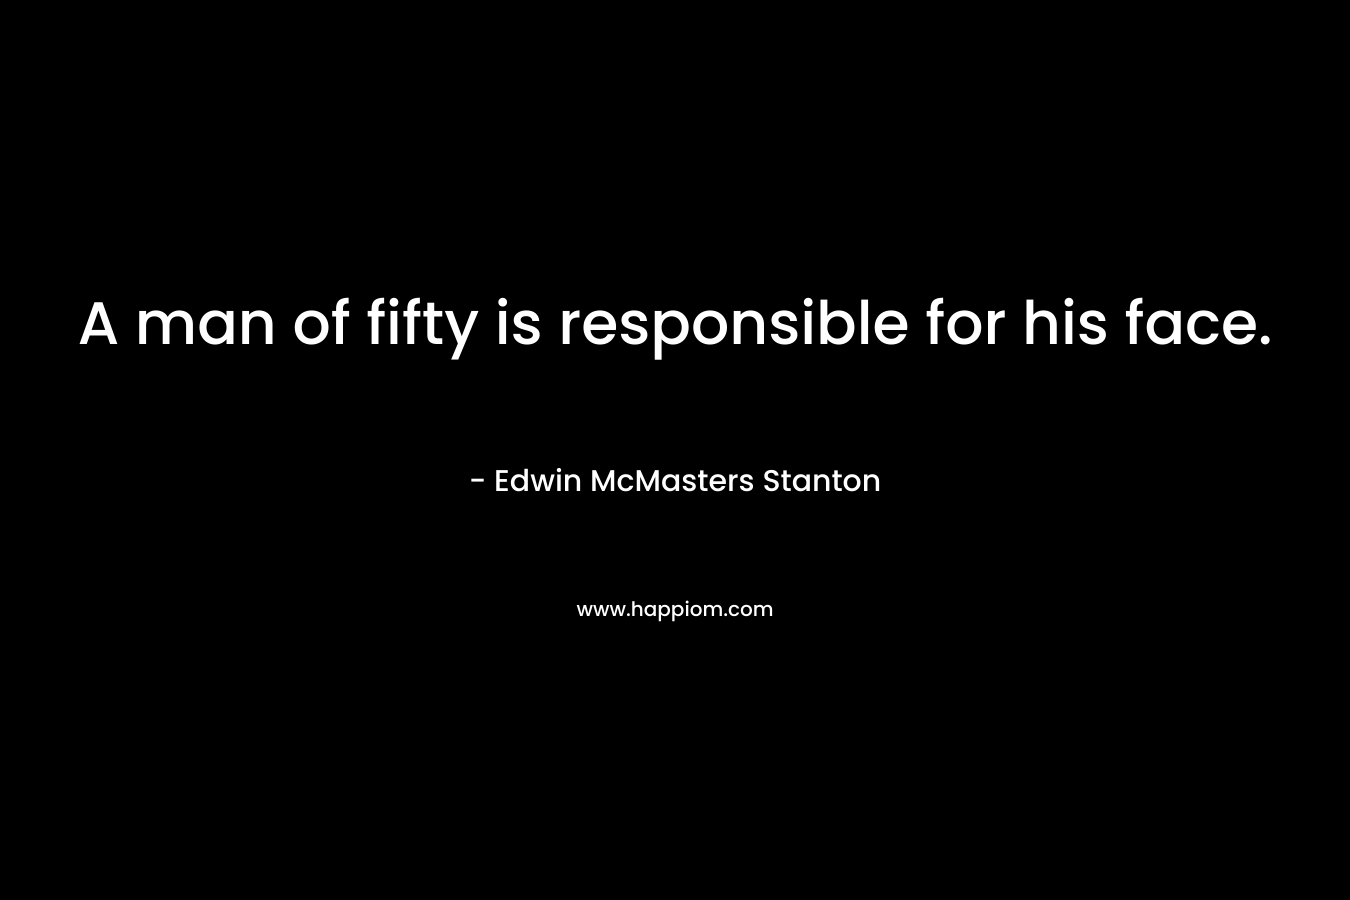 A man of fifty is responsible for his face. – Edwin McMasters Stanton